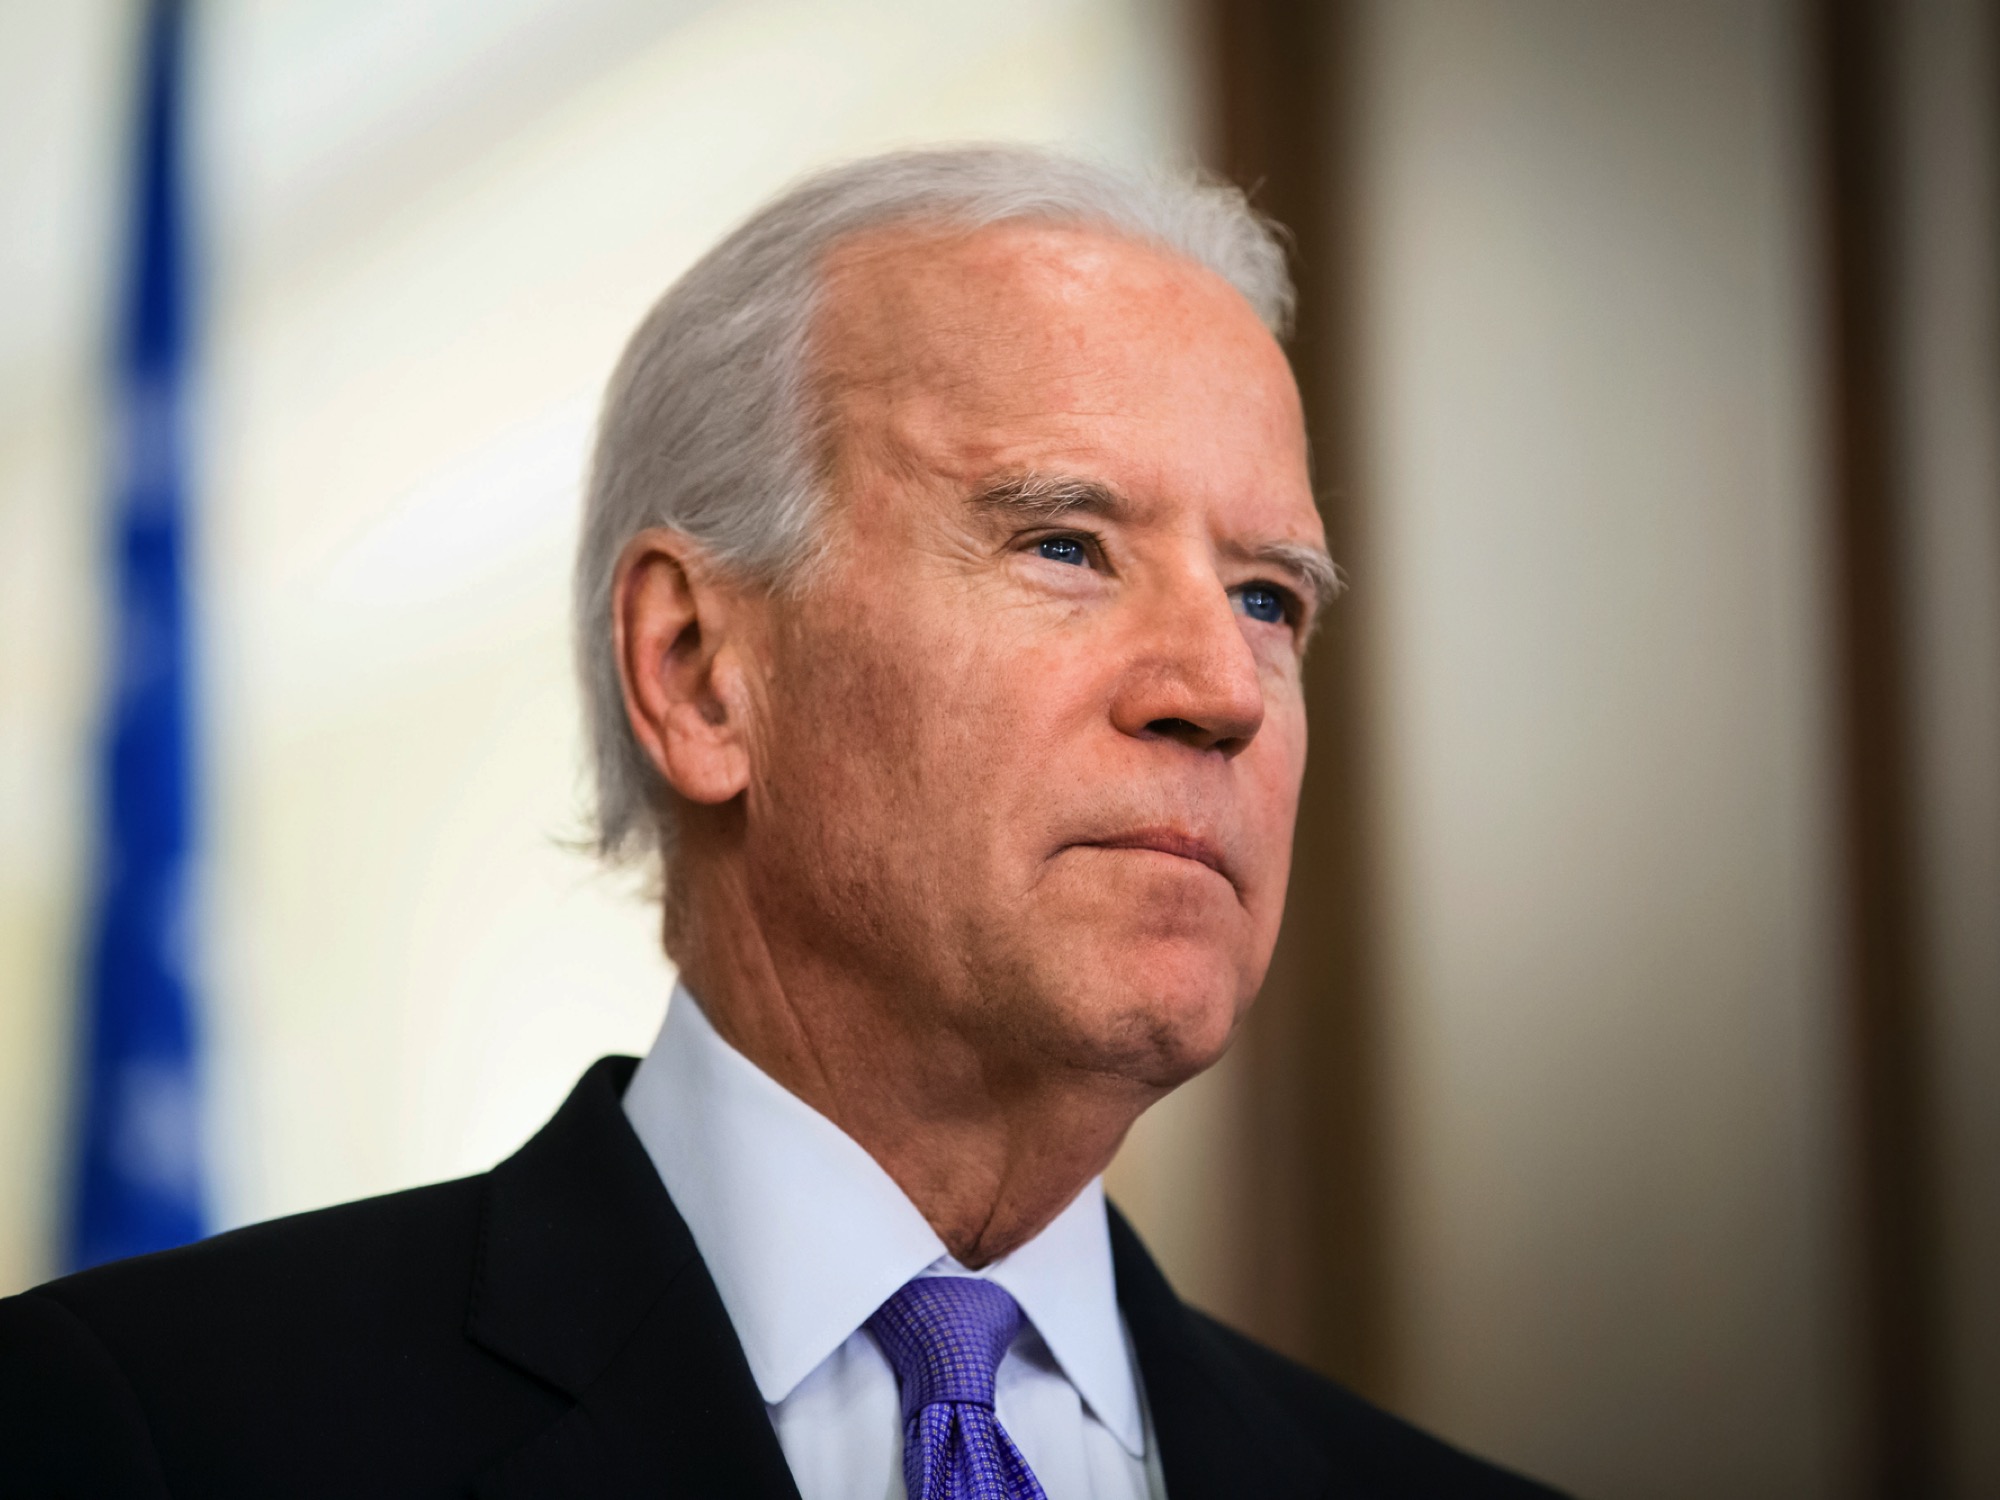 One glaring issue with Biden’s State of the Union